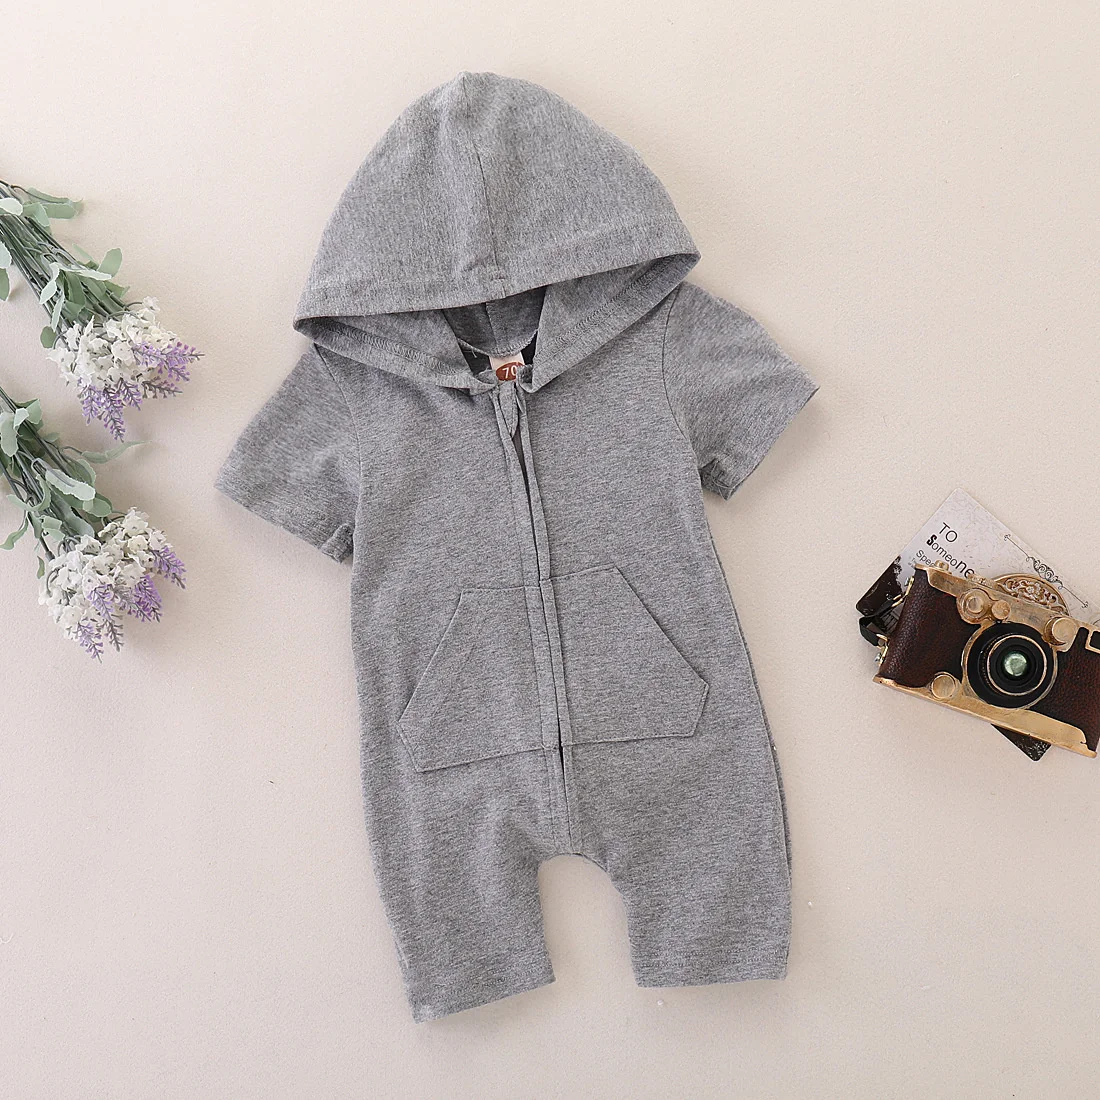 baby bodysuit dress ad logo  Born Newborn Toddler Infant Baby Boys Girl Casual Romper Jumpsuit Cotton Short Sleeve Clothes Summer Sunsuit Outfits cute baby bodysuits